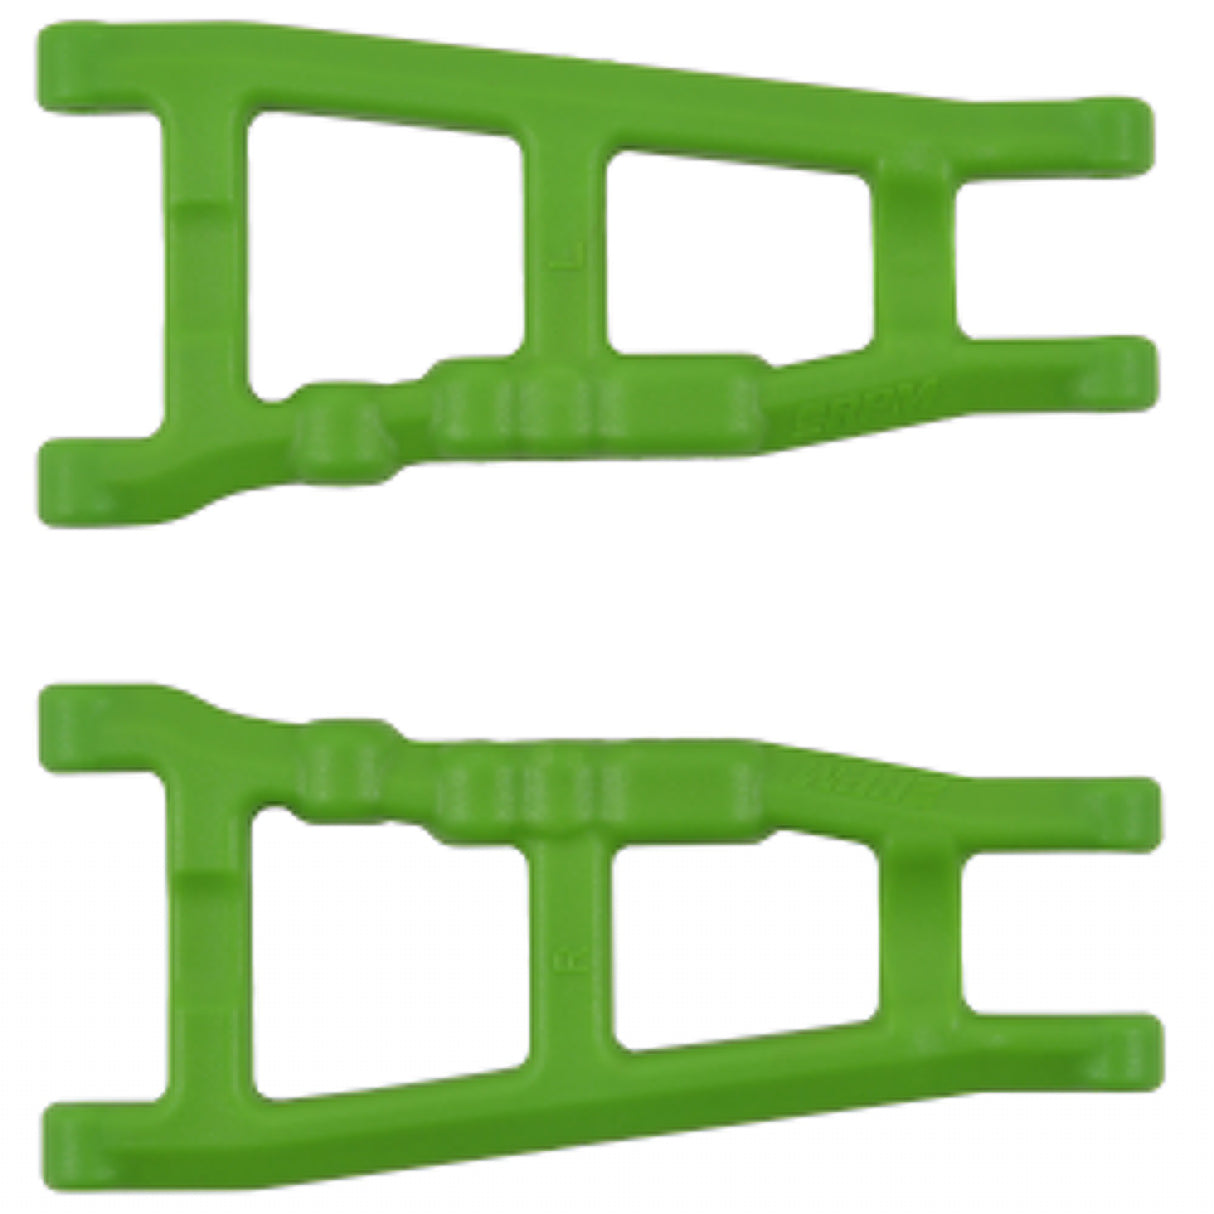 RPM 80704 Front or Rear A-Arms for Traxxas Slash 4x4 and Rustler 4x4, Green